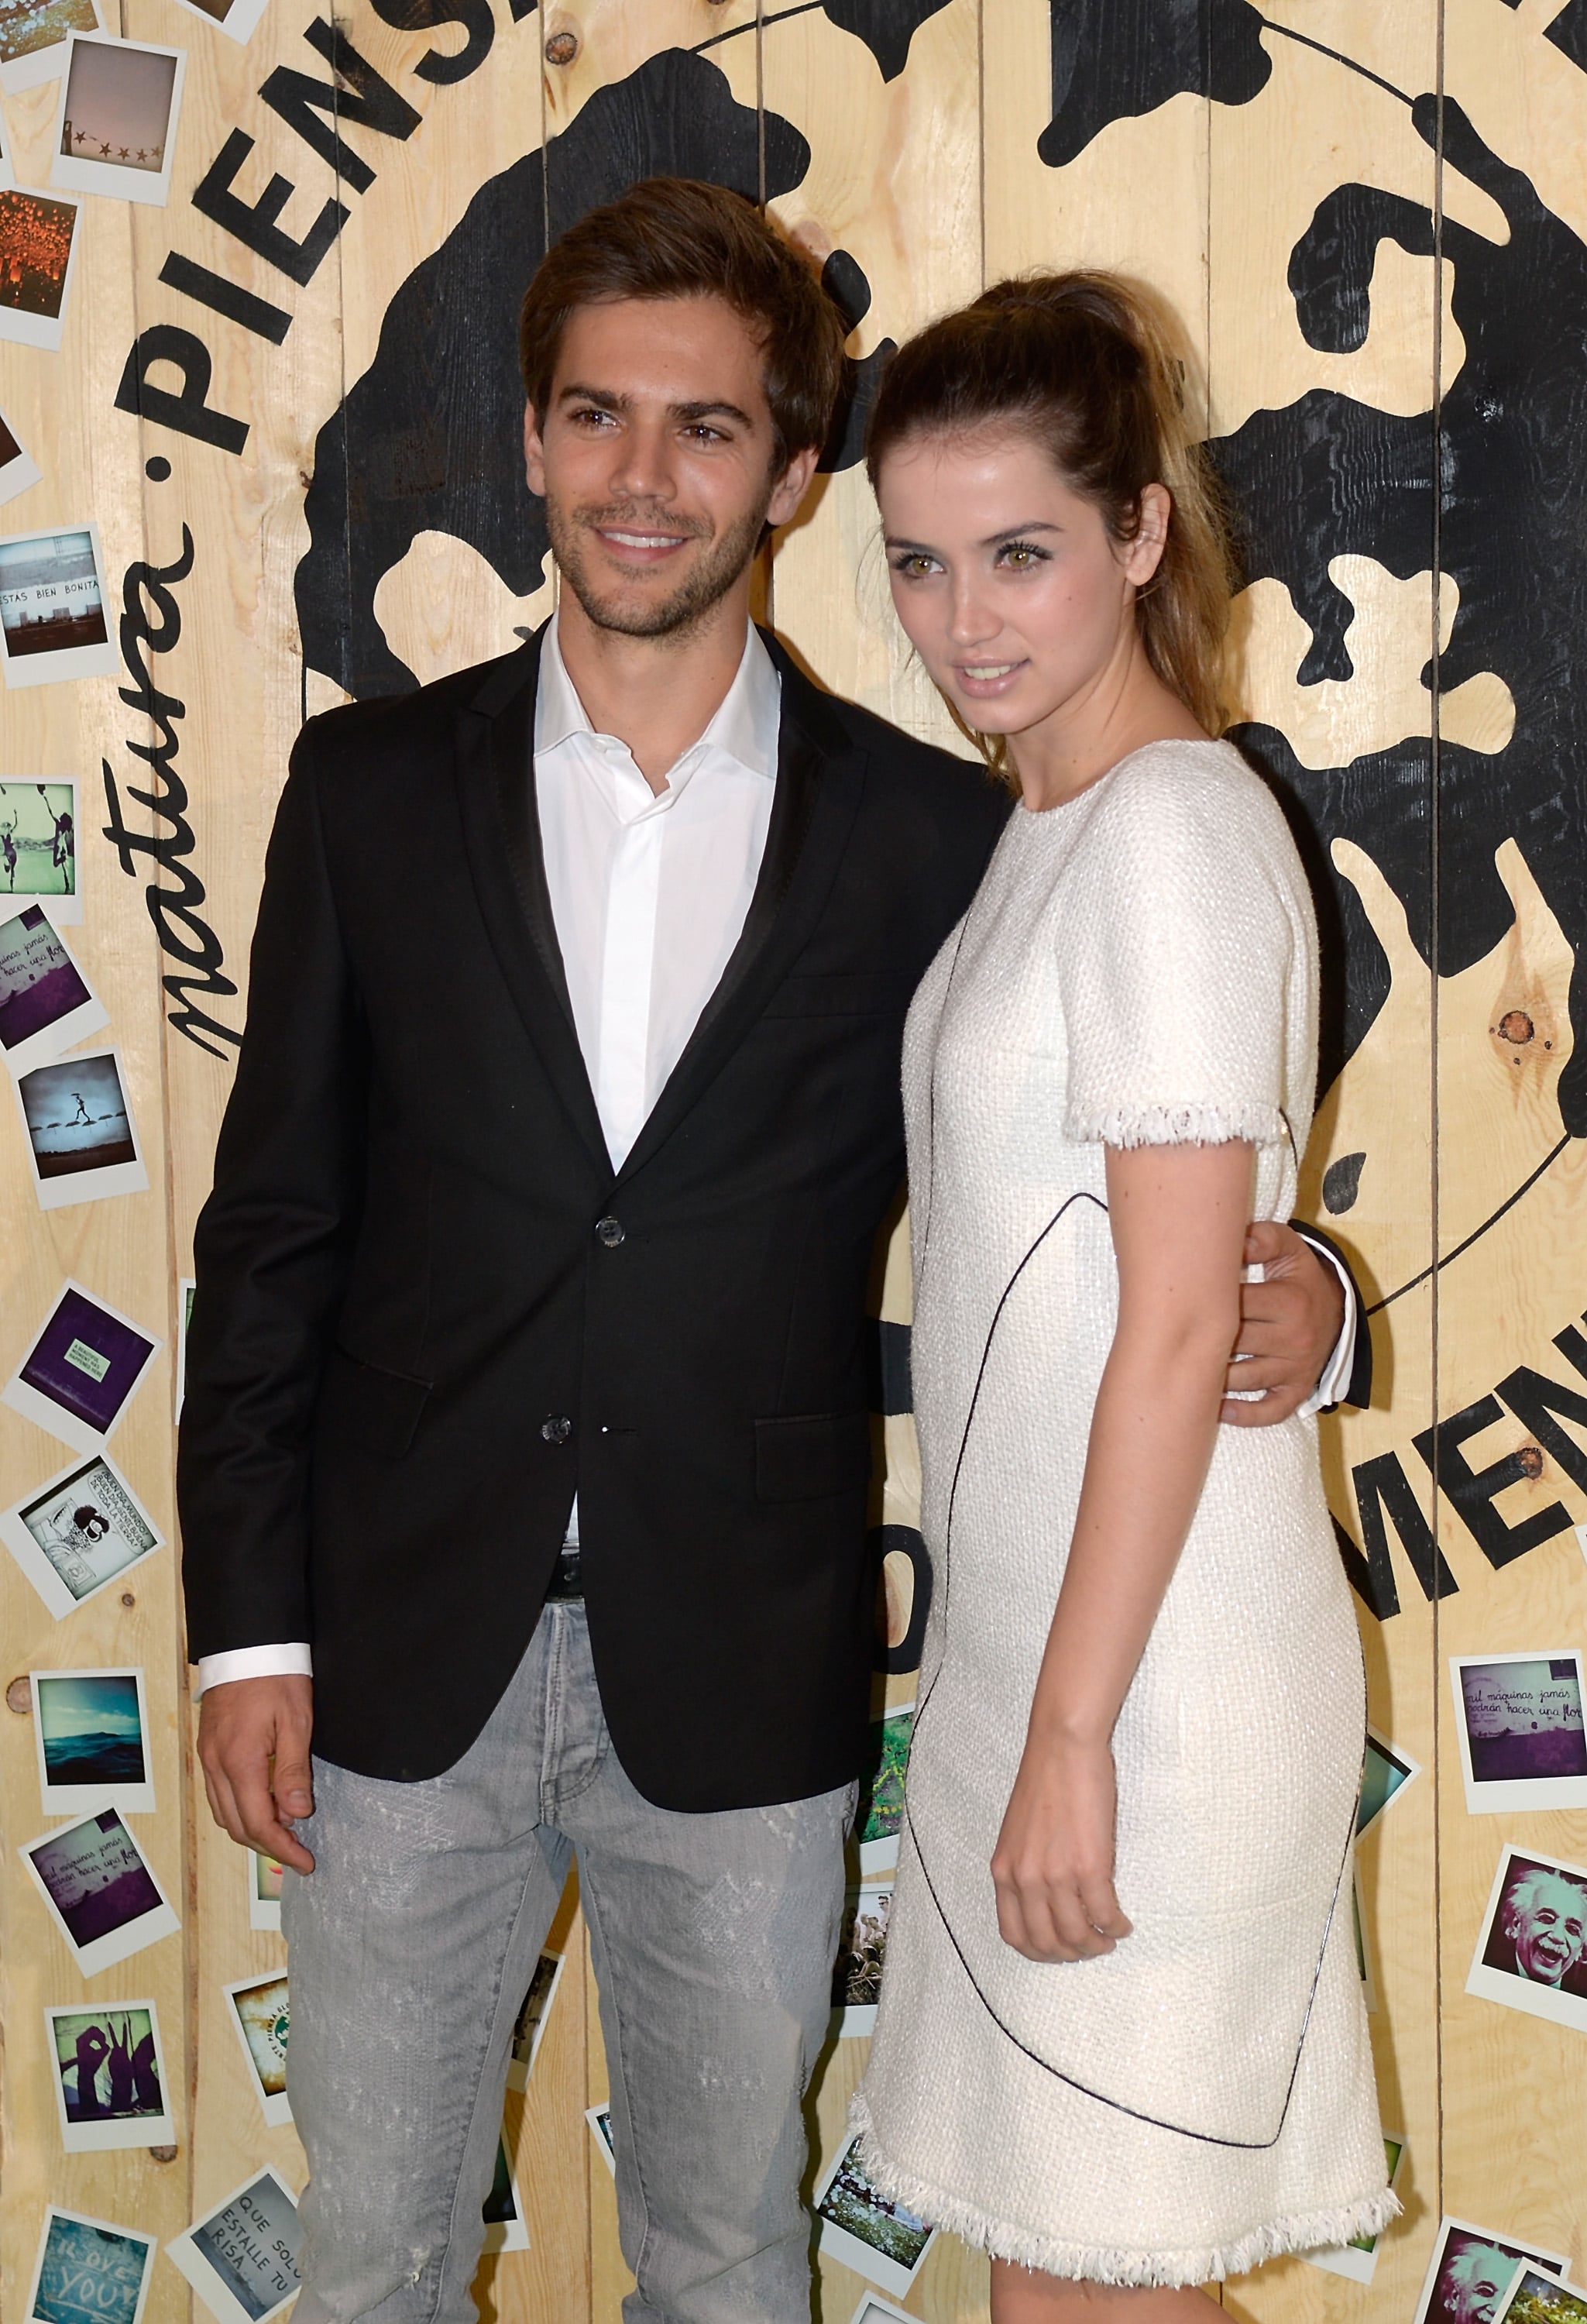 Who Is Ana De Armas Dating? A Look at Her Love Life